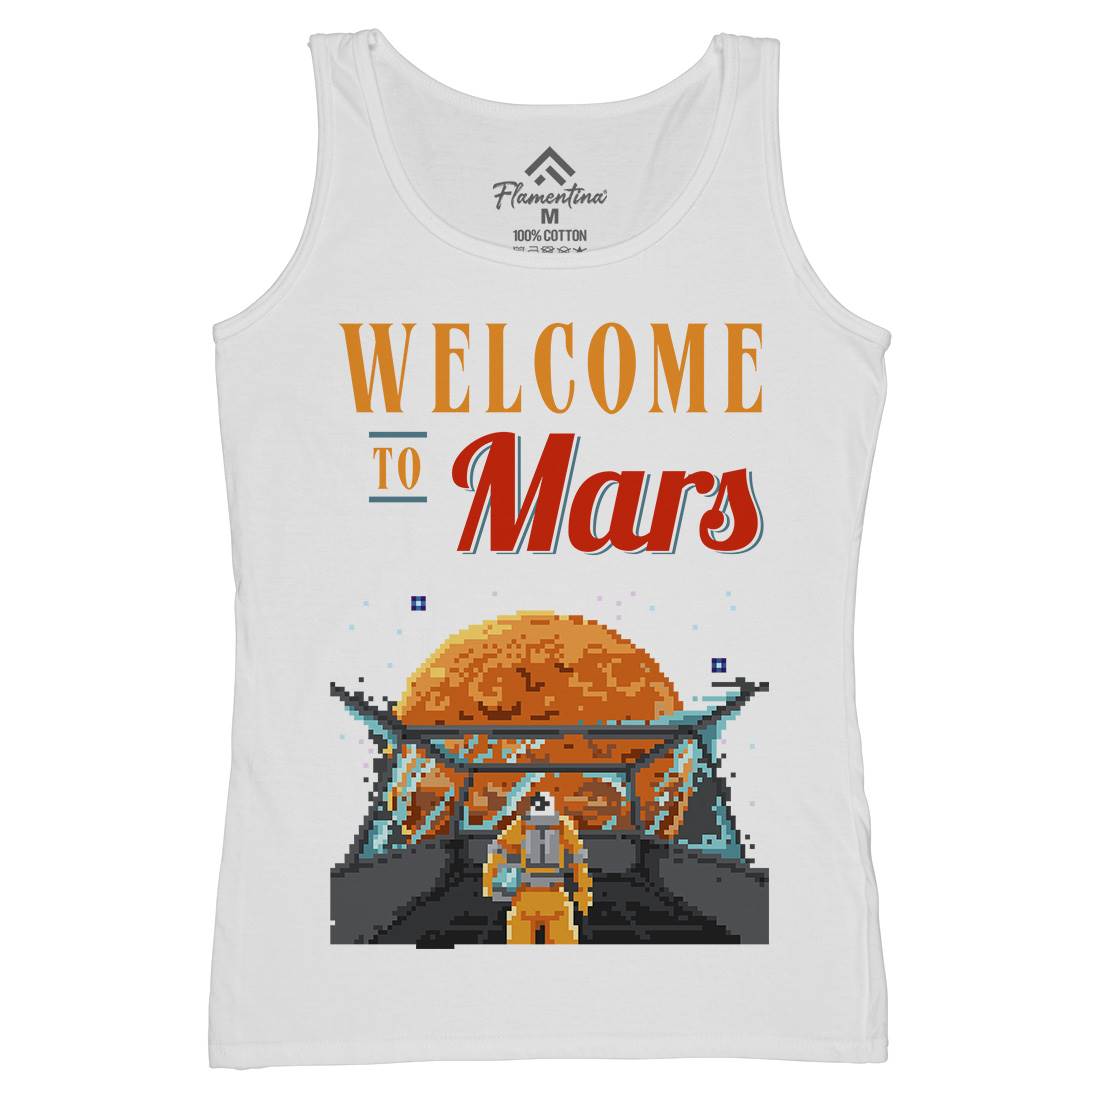 Welcome To Mars Womens Organic Tank Top Vest Space B978